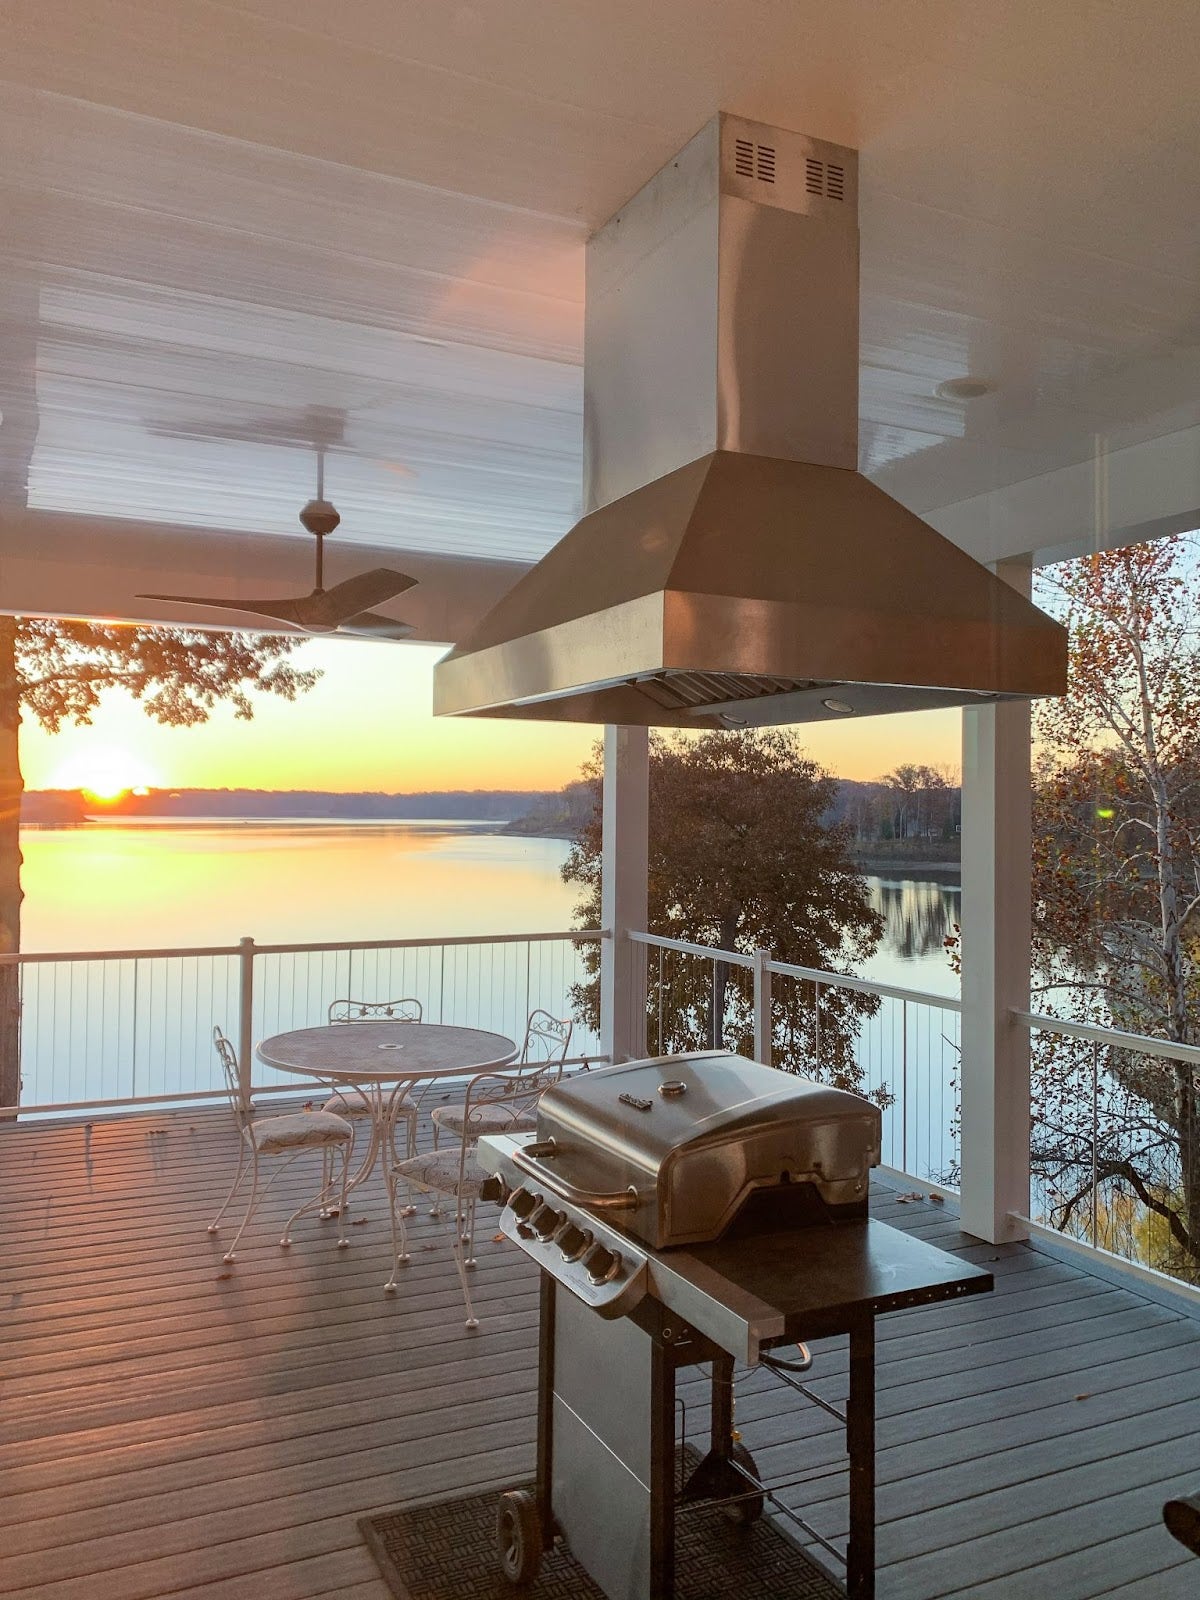 Serene deck kitchen with modern grilling amenities overlooking a tranquil lake at dusk.
